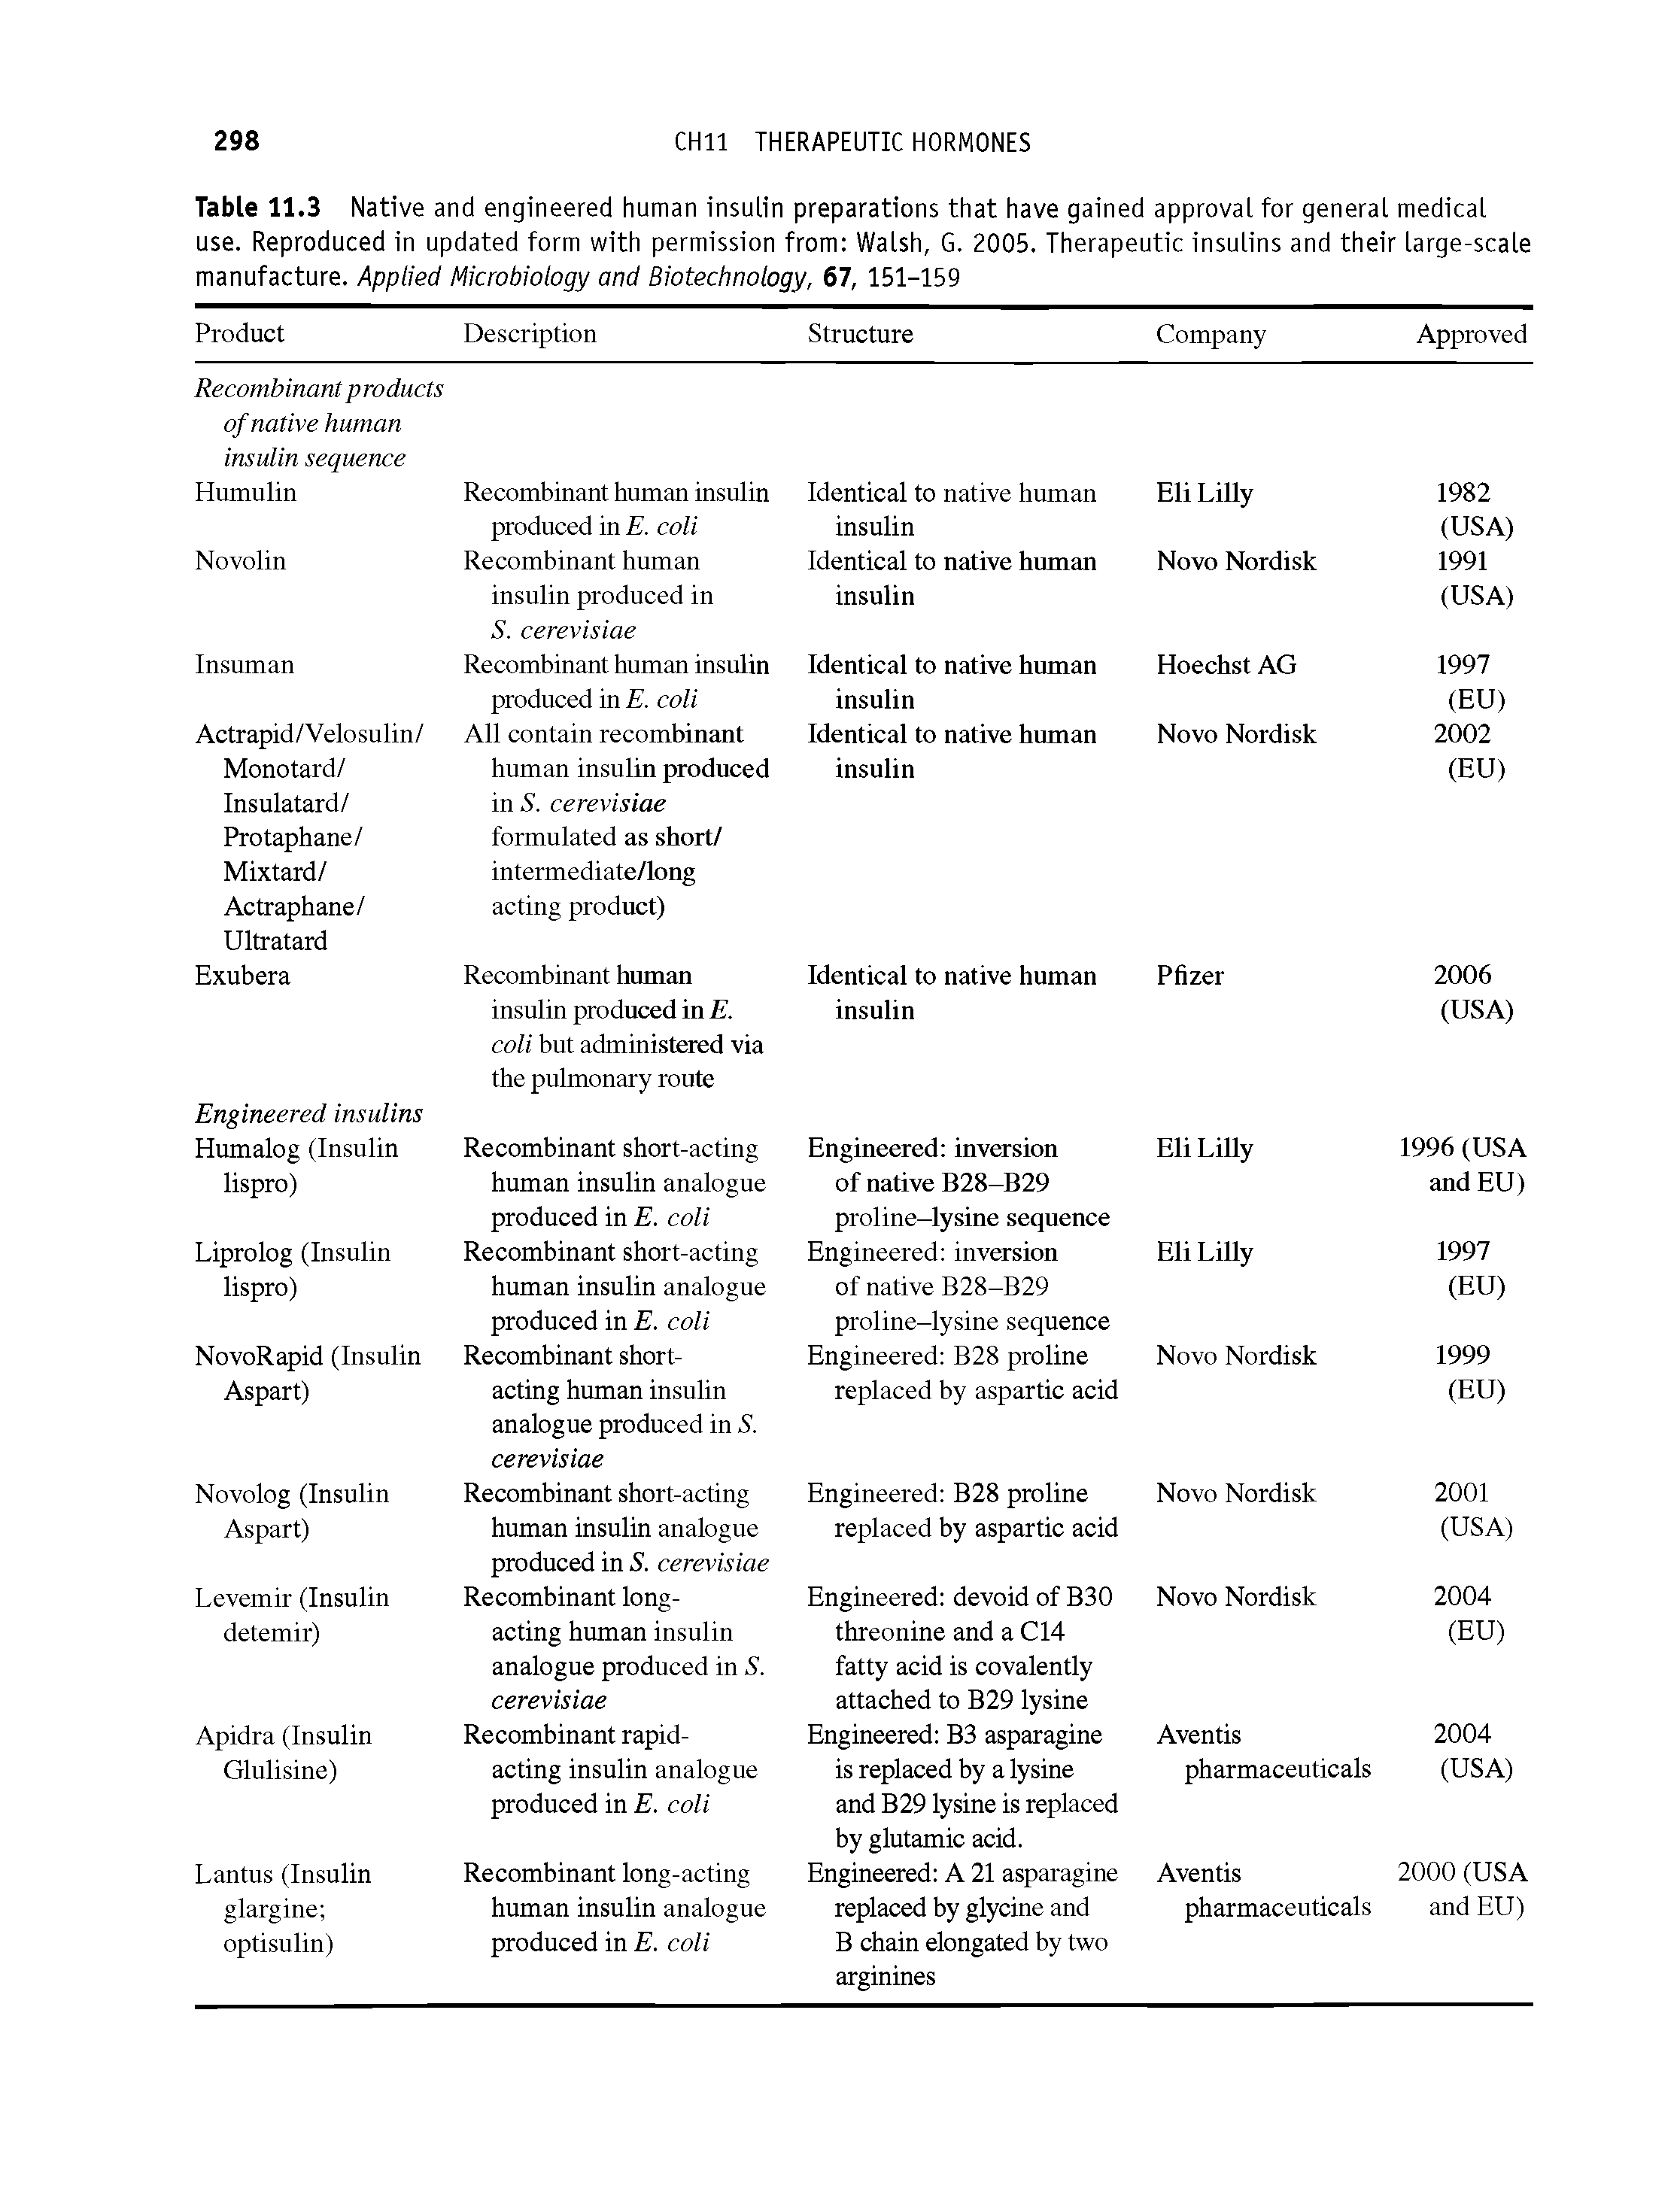 Table 11.3 Native and engineered human insulin preparations that have gained approval for general medical use. Reproduced in updated form with permission from Walsh, G. 2005. Therapeutic insulins and their large-scale manufacture. Applied Microbiology and Biotechnology, 67, 151-159...